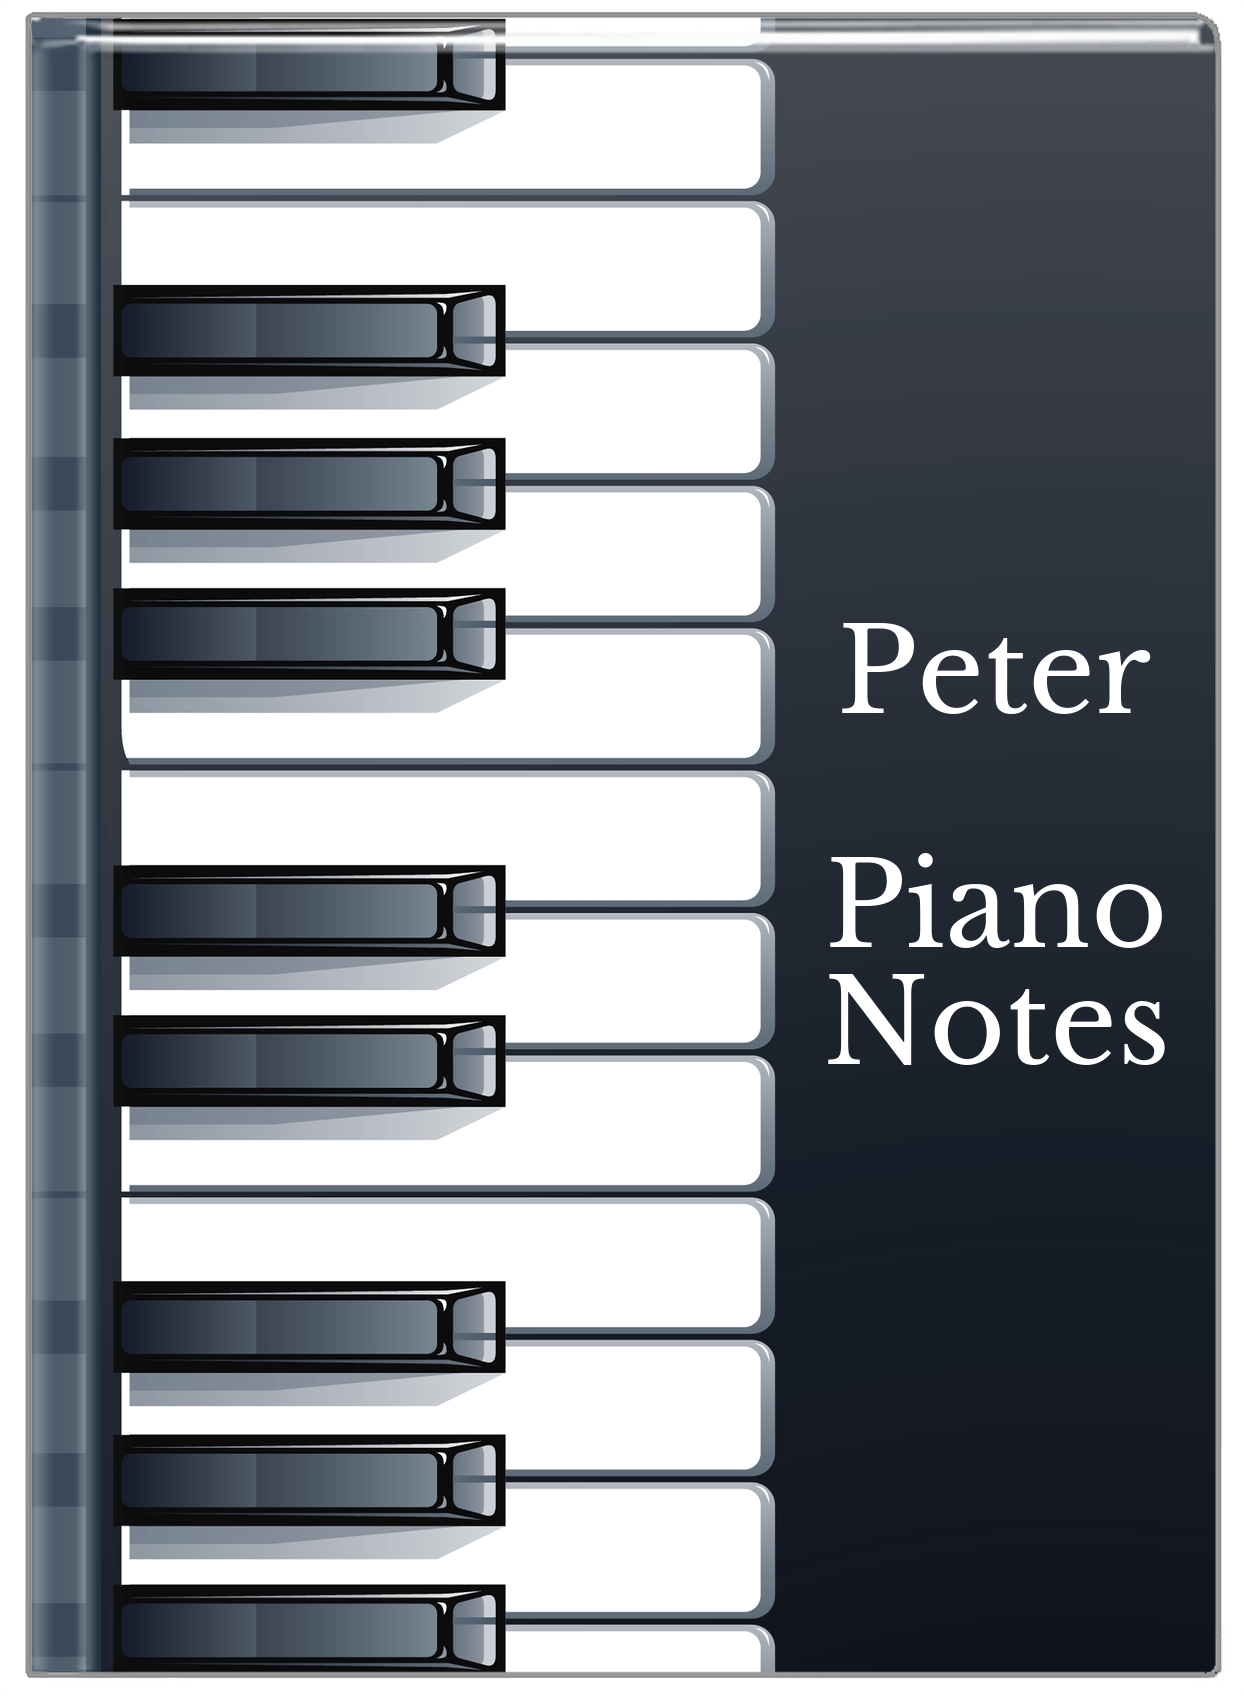 Personalized Piano Keys Journal - Black Background I - Front View